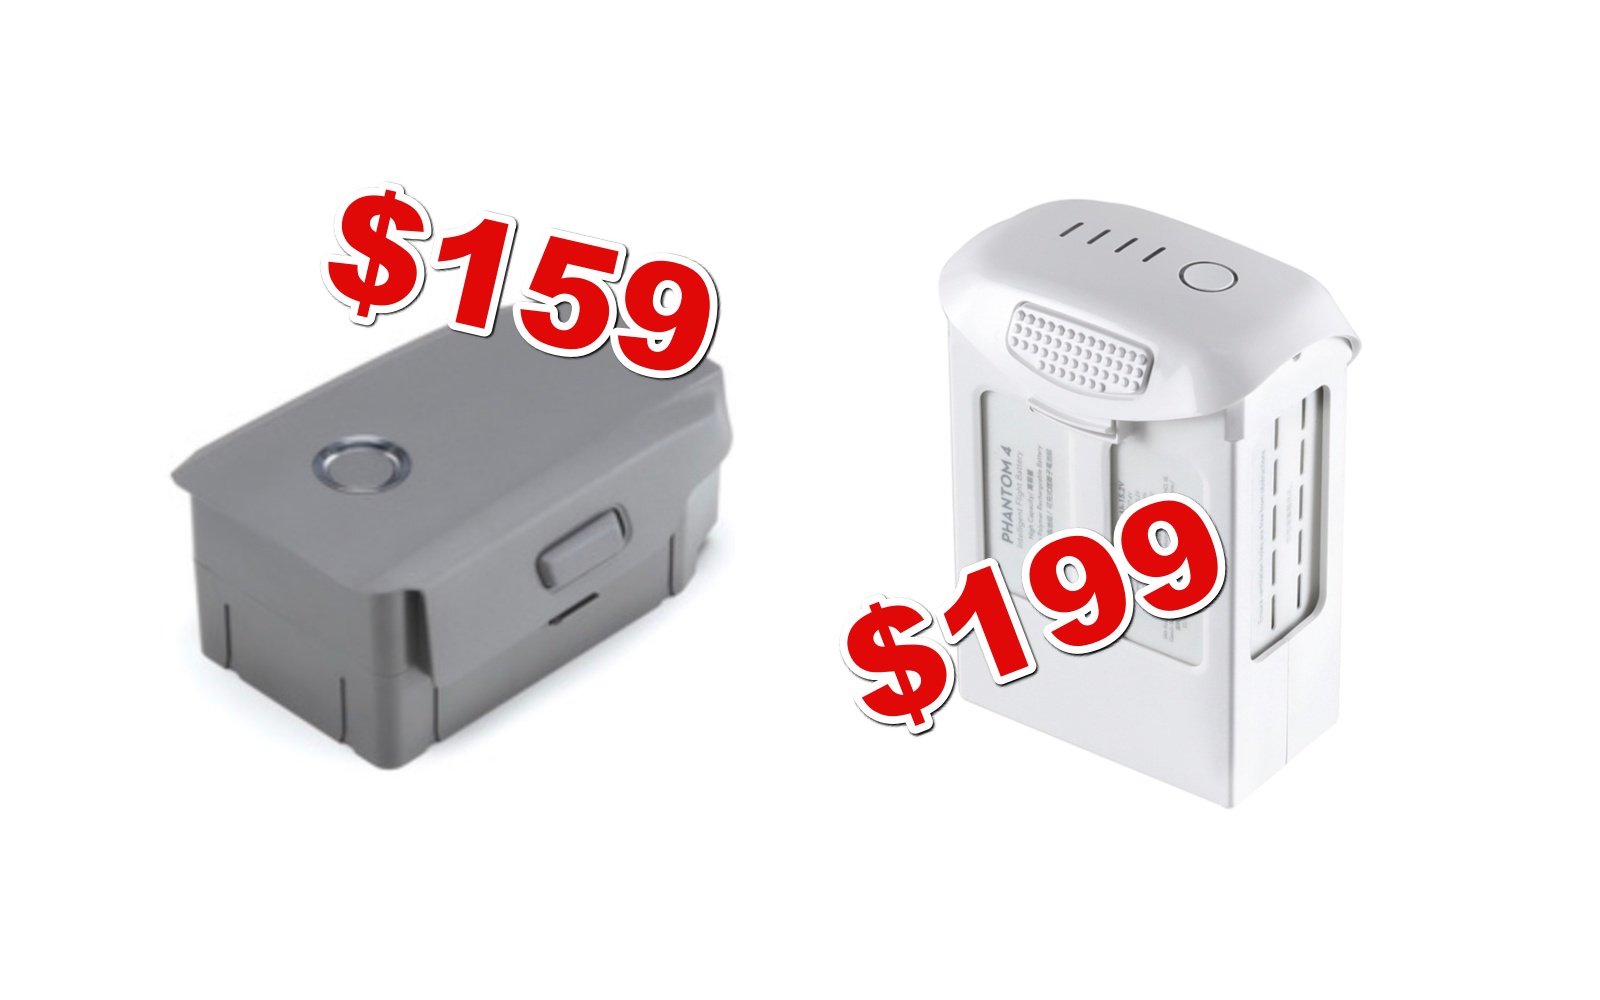 The tariffs also result in a price increase for the DJI Mavic 2 Intelligent Flight Battery and the DJI Phantom 4 Series Intelligent Flight Battery.